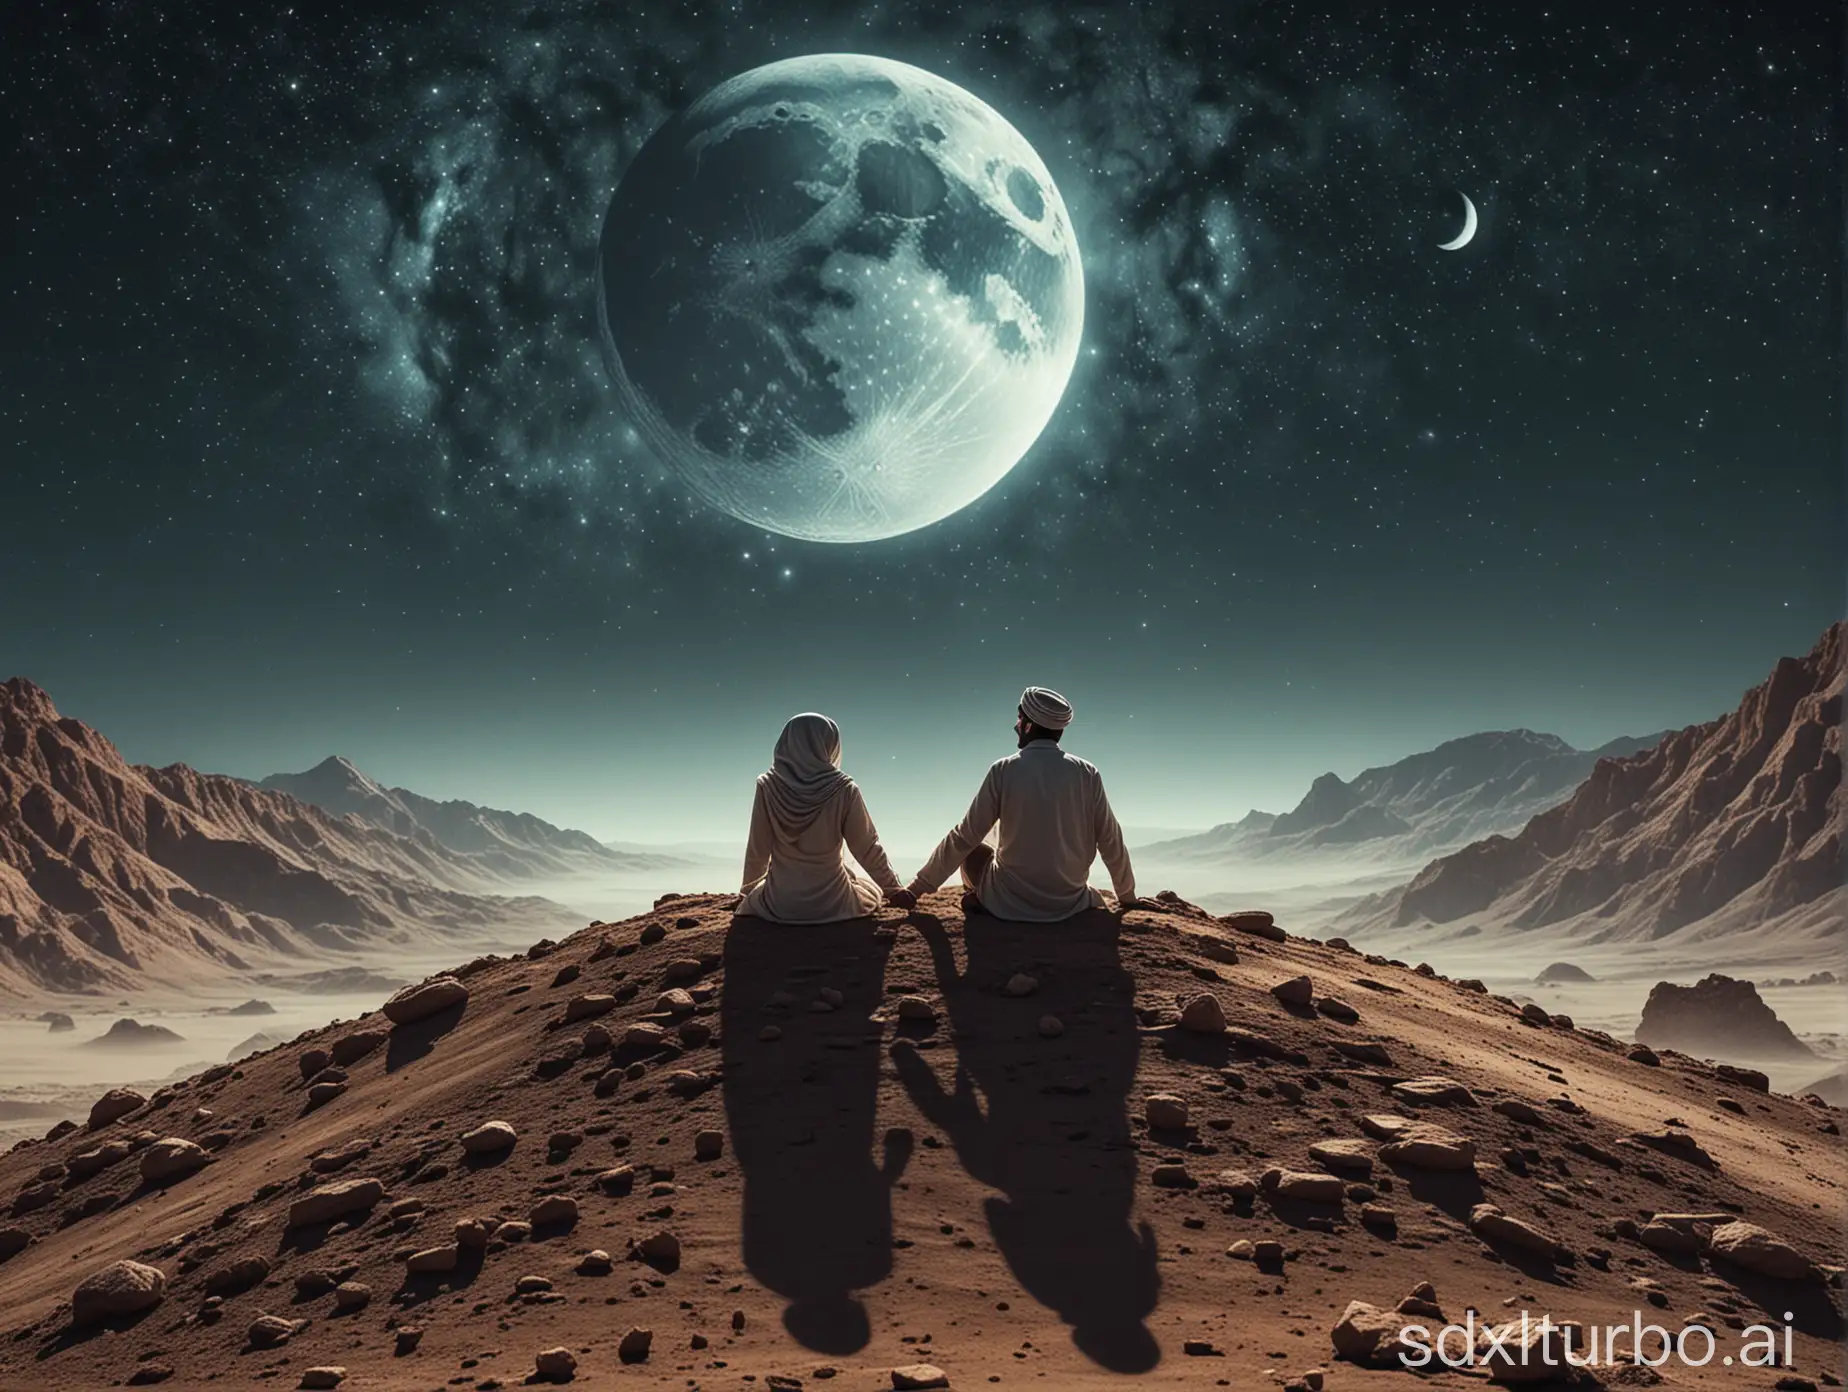 Iranian-Couple-Embracing-in-a-Moonlit-Fantasy-Landscape